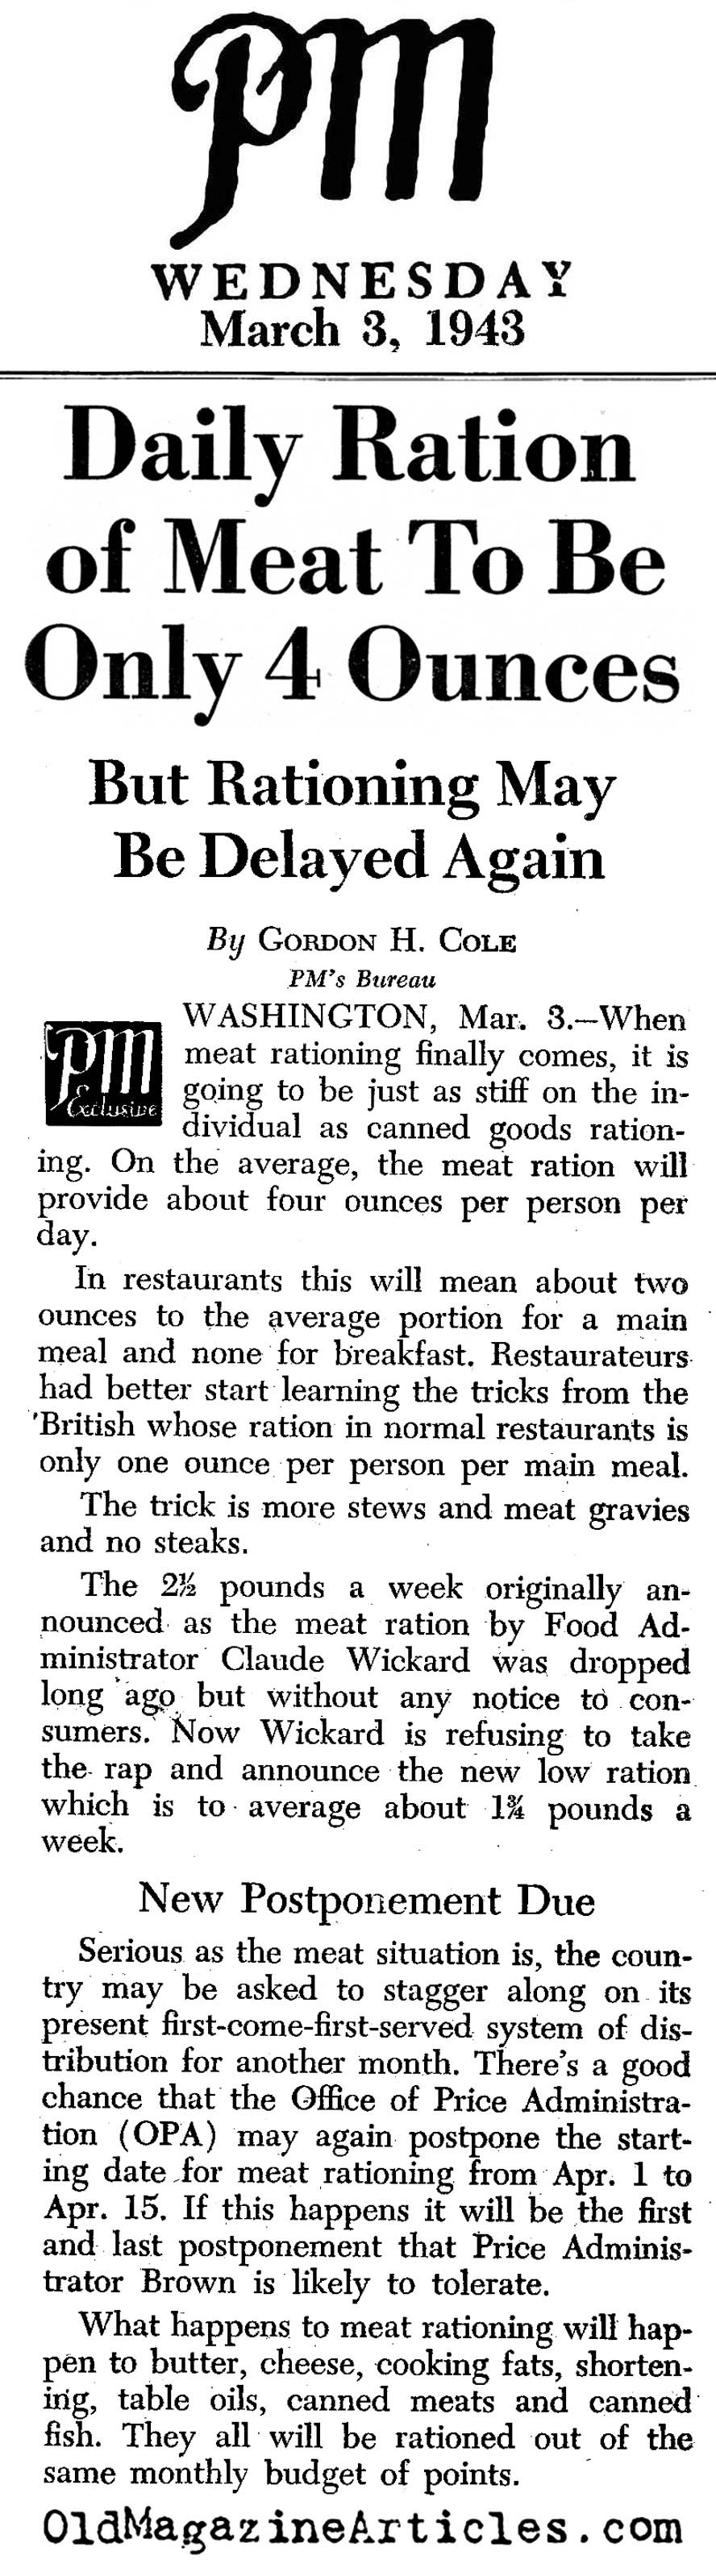 The Rationing of Meat (PM Tabloid, 1943)